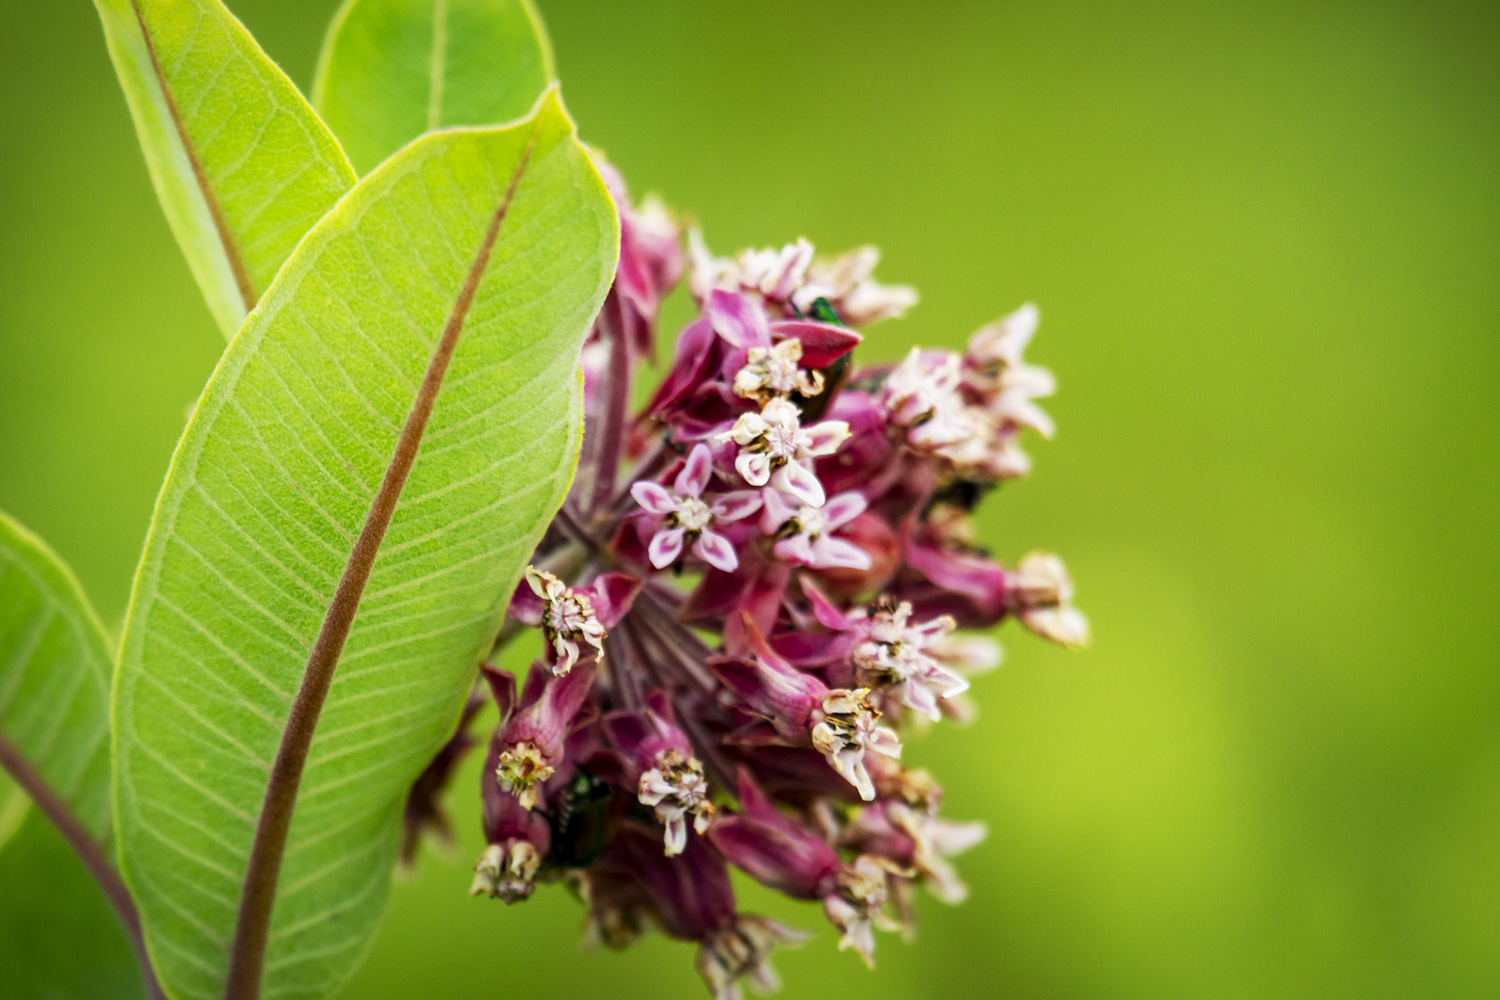 Close up view of the common milkweed with a shallow depth of field.